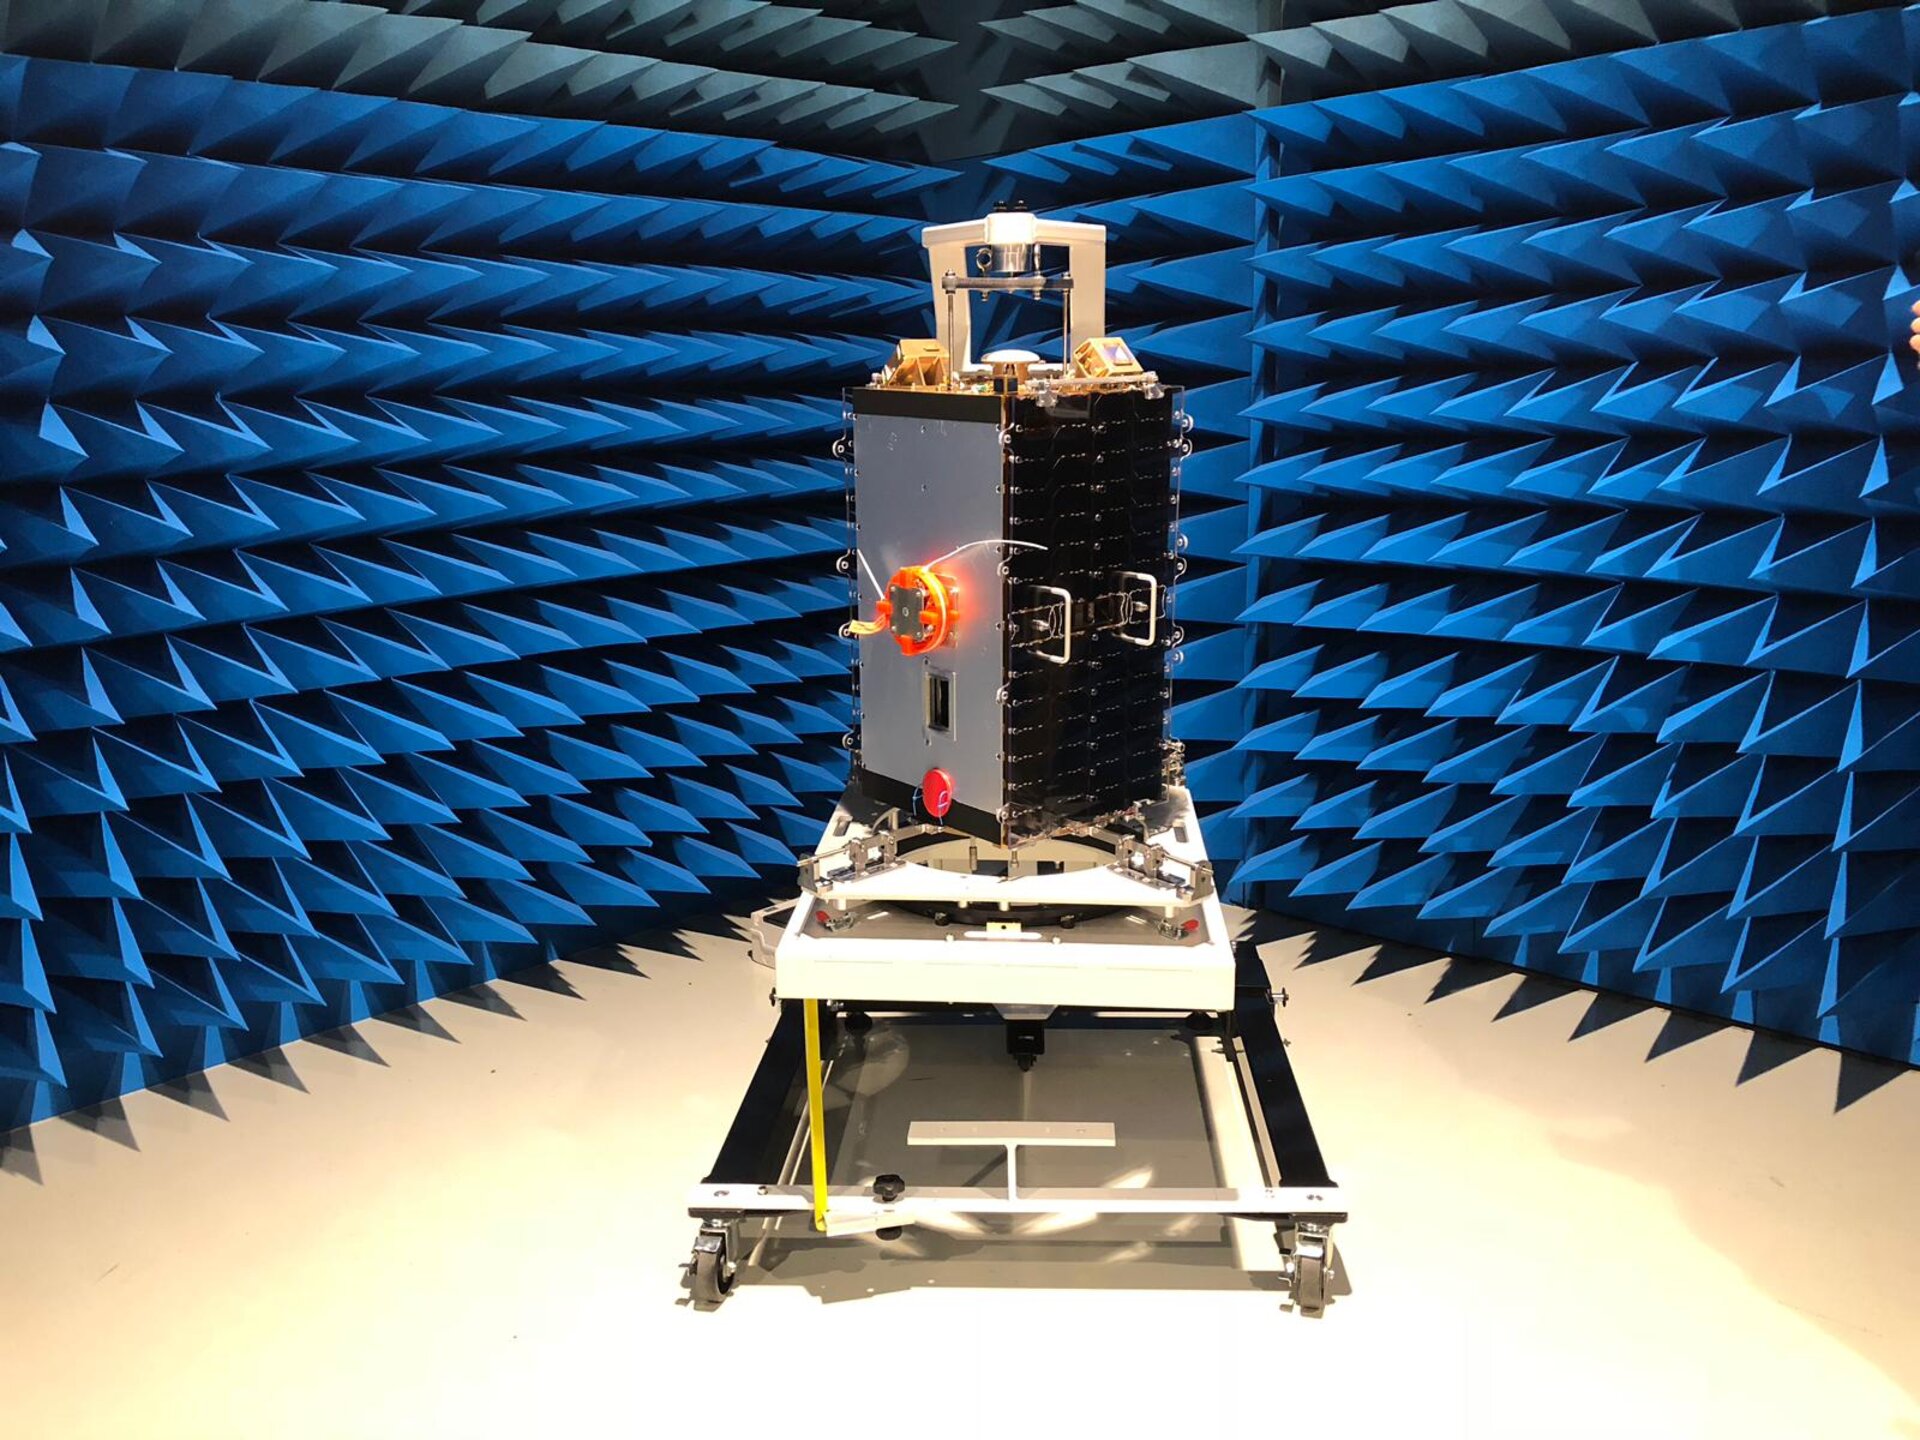 ESEO sits in isometric view on its transportation cart inside an anechoic chamber